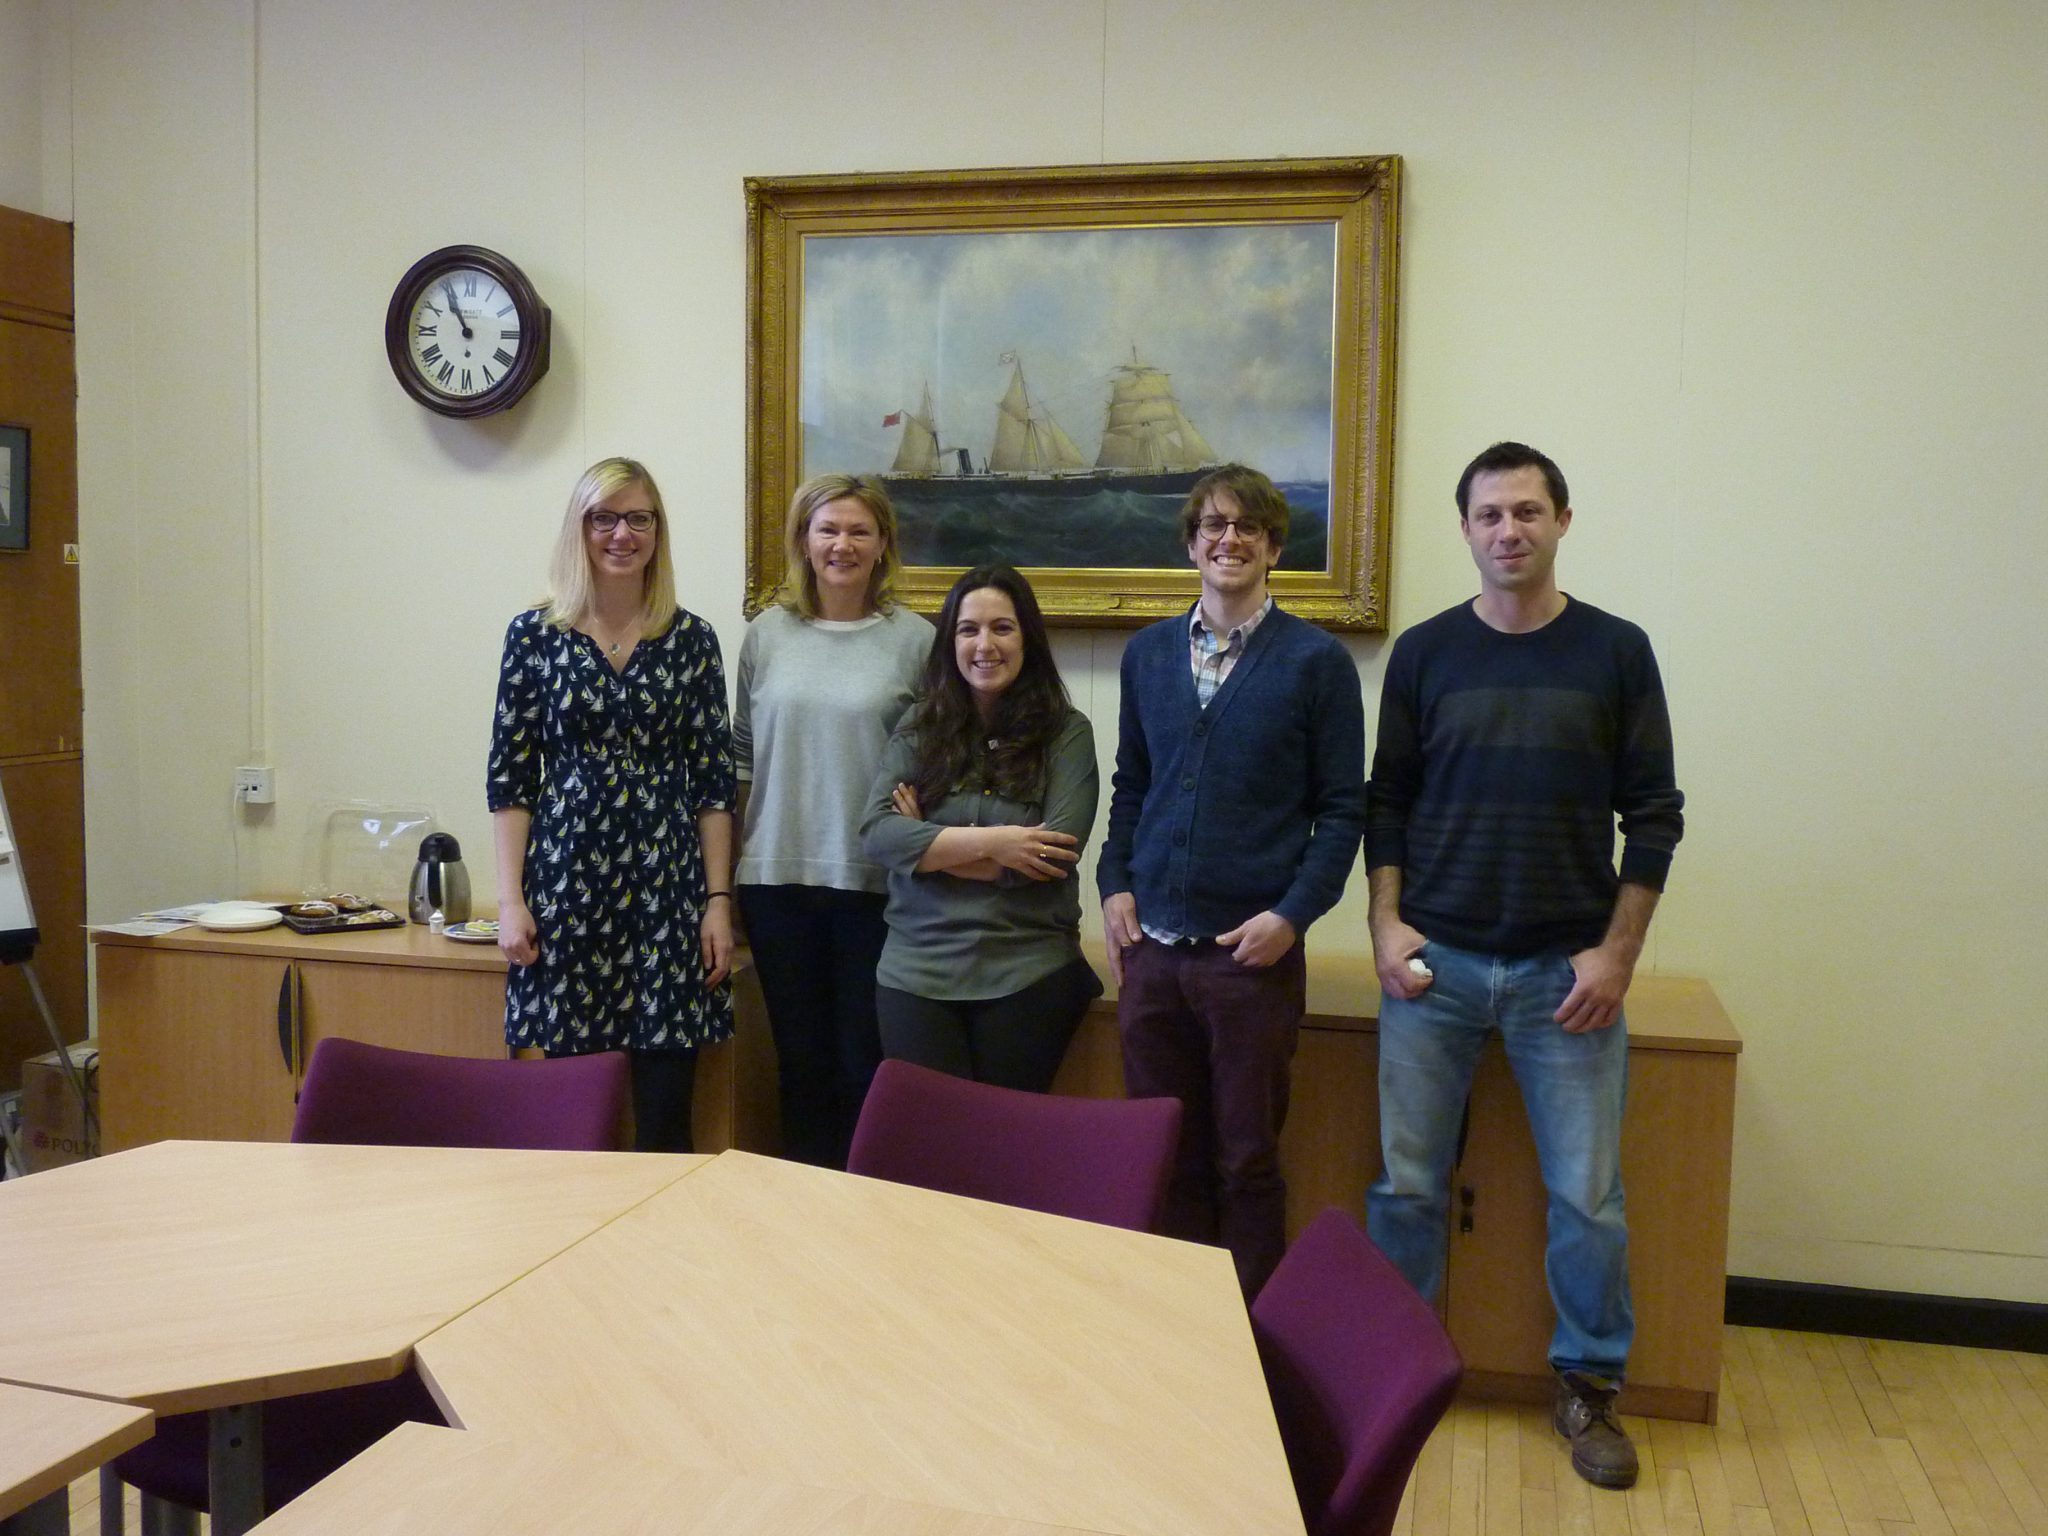 From left to right: Dr Ruth Wade (The University of Sheffield), Dr Alison Scott-Brown (Kew Gardens), Dr Sofia Cota-Franco (Newcastle University), Dr Rory O’Connor (University of Reading), and Dr Ben Keane (University of York)